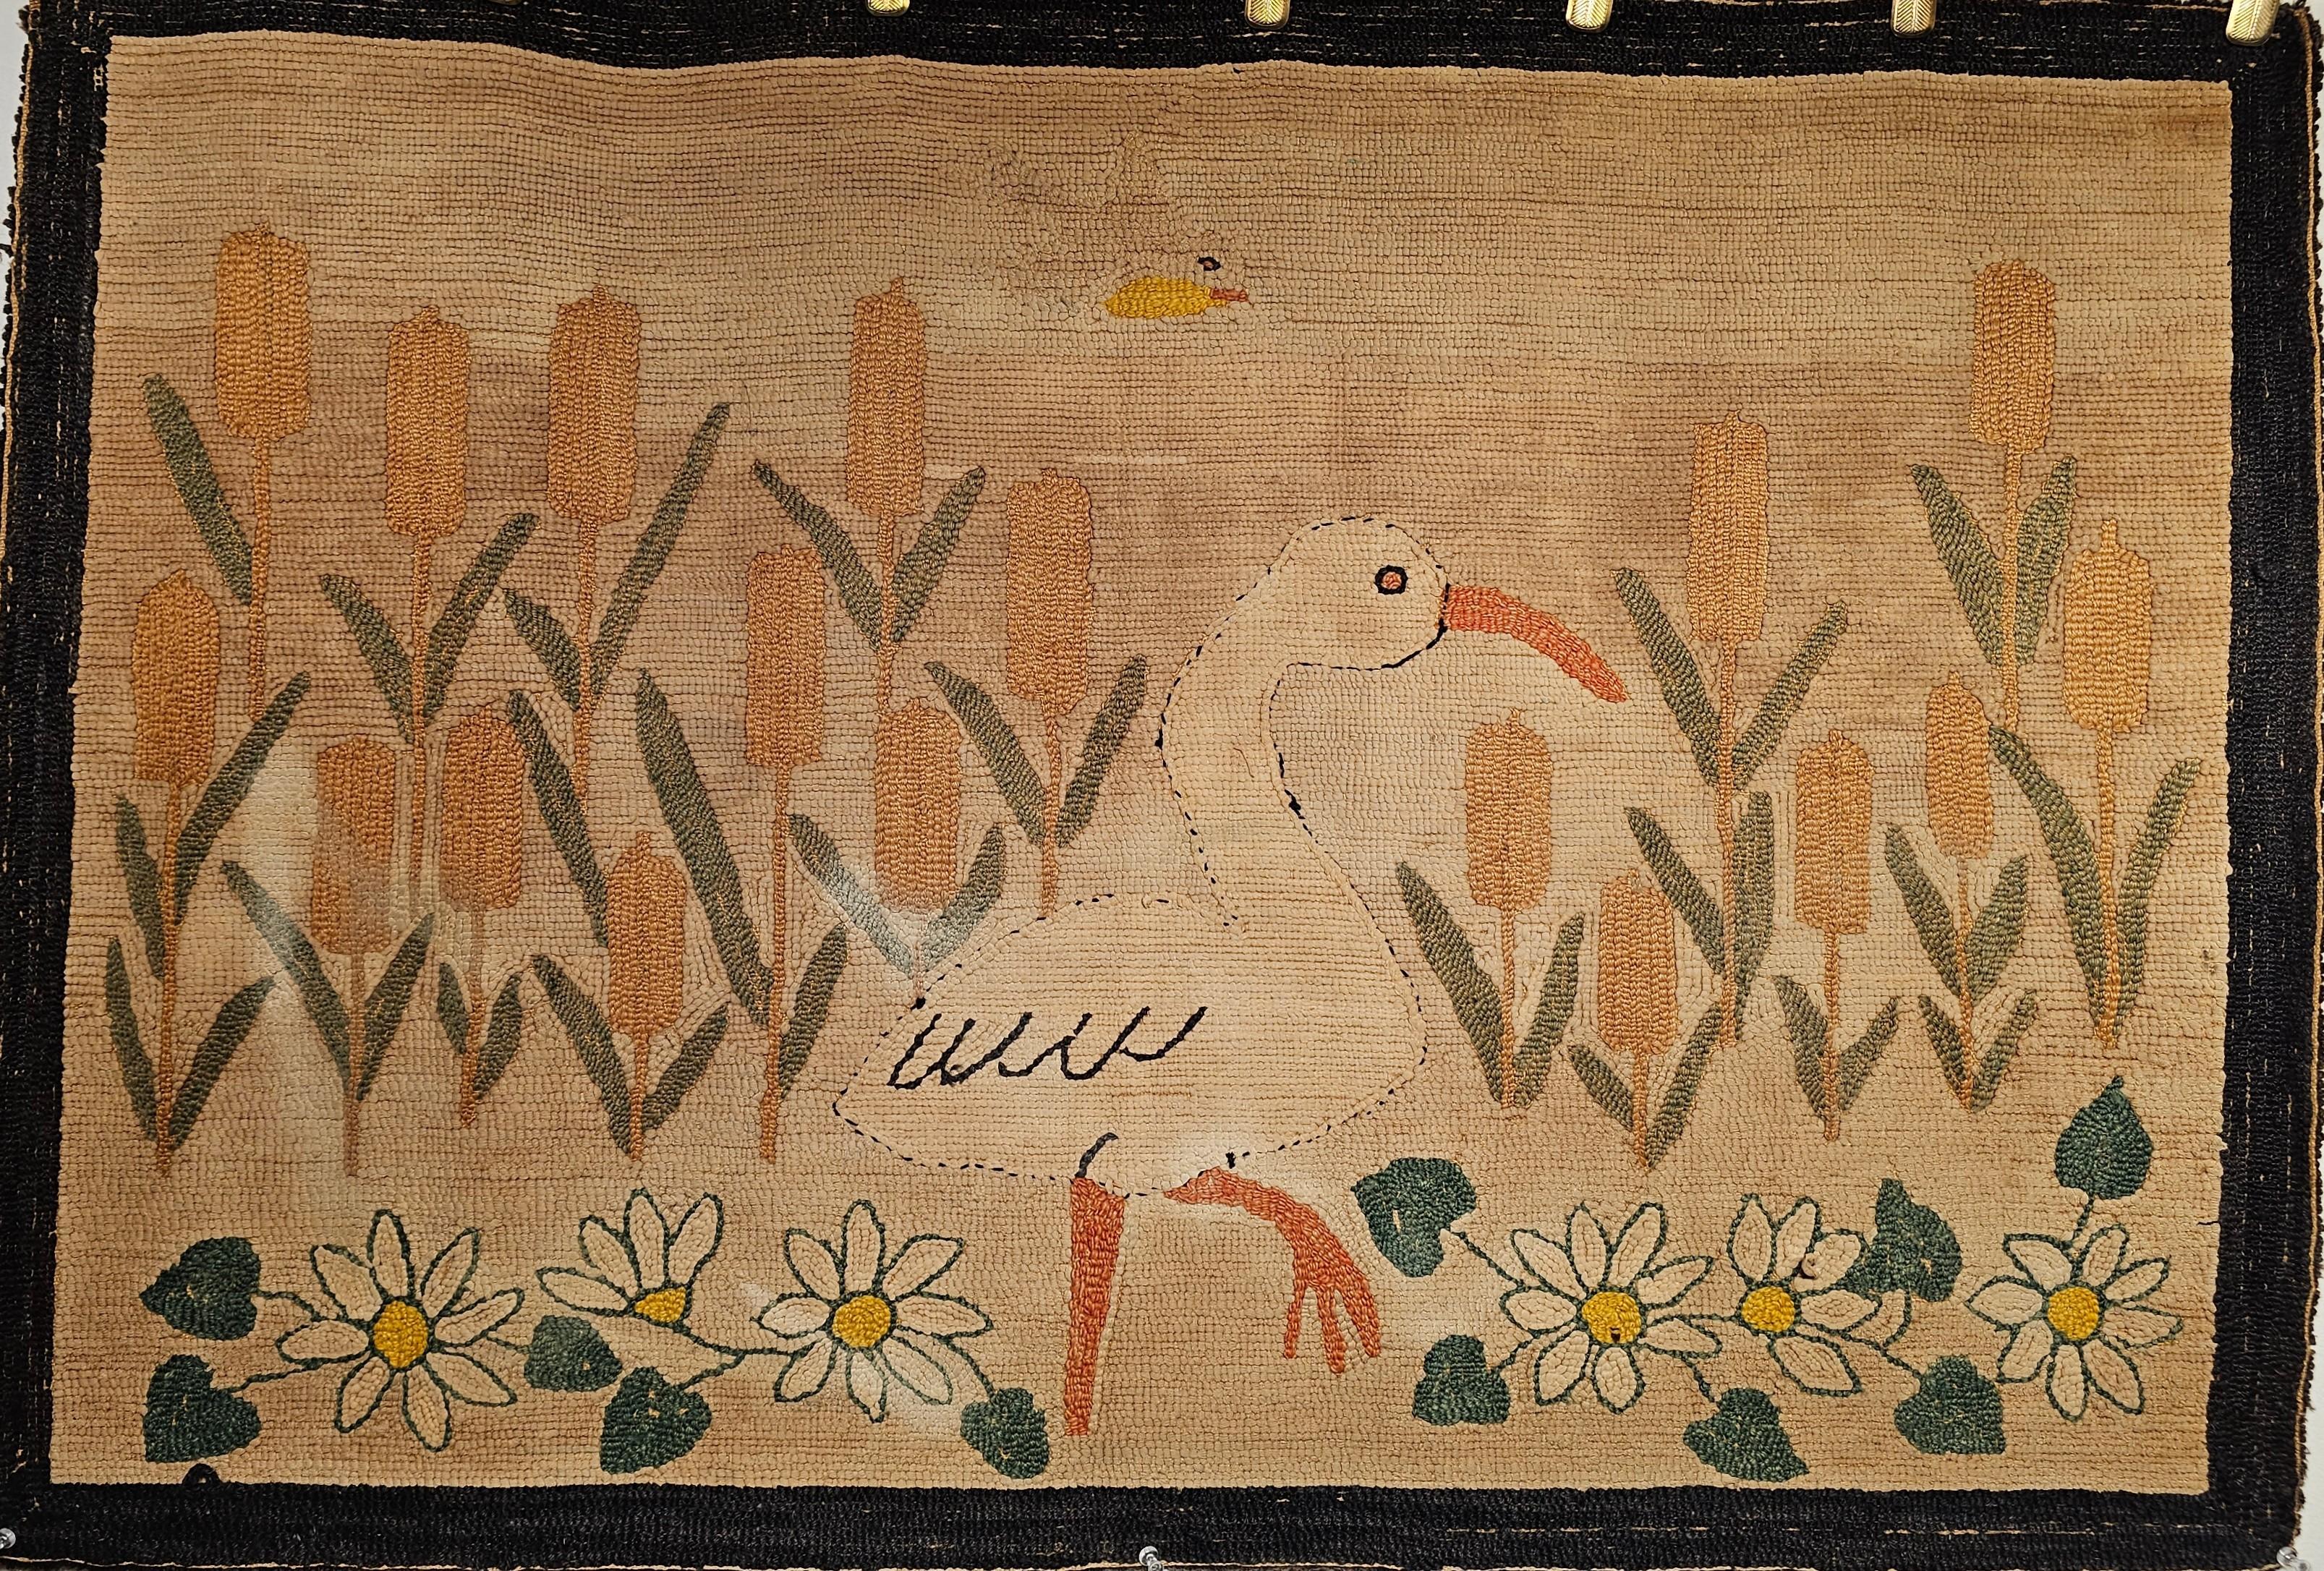 Early 20th Century American Hand Hooked Rug in a Bird and Flowers Design In Good Condition For Sale In Barrington, IL